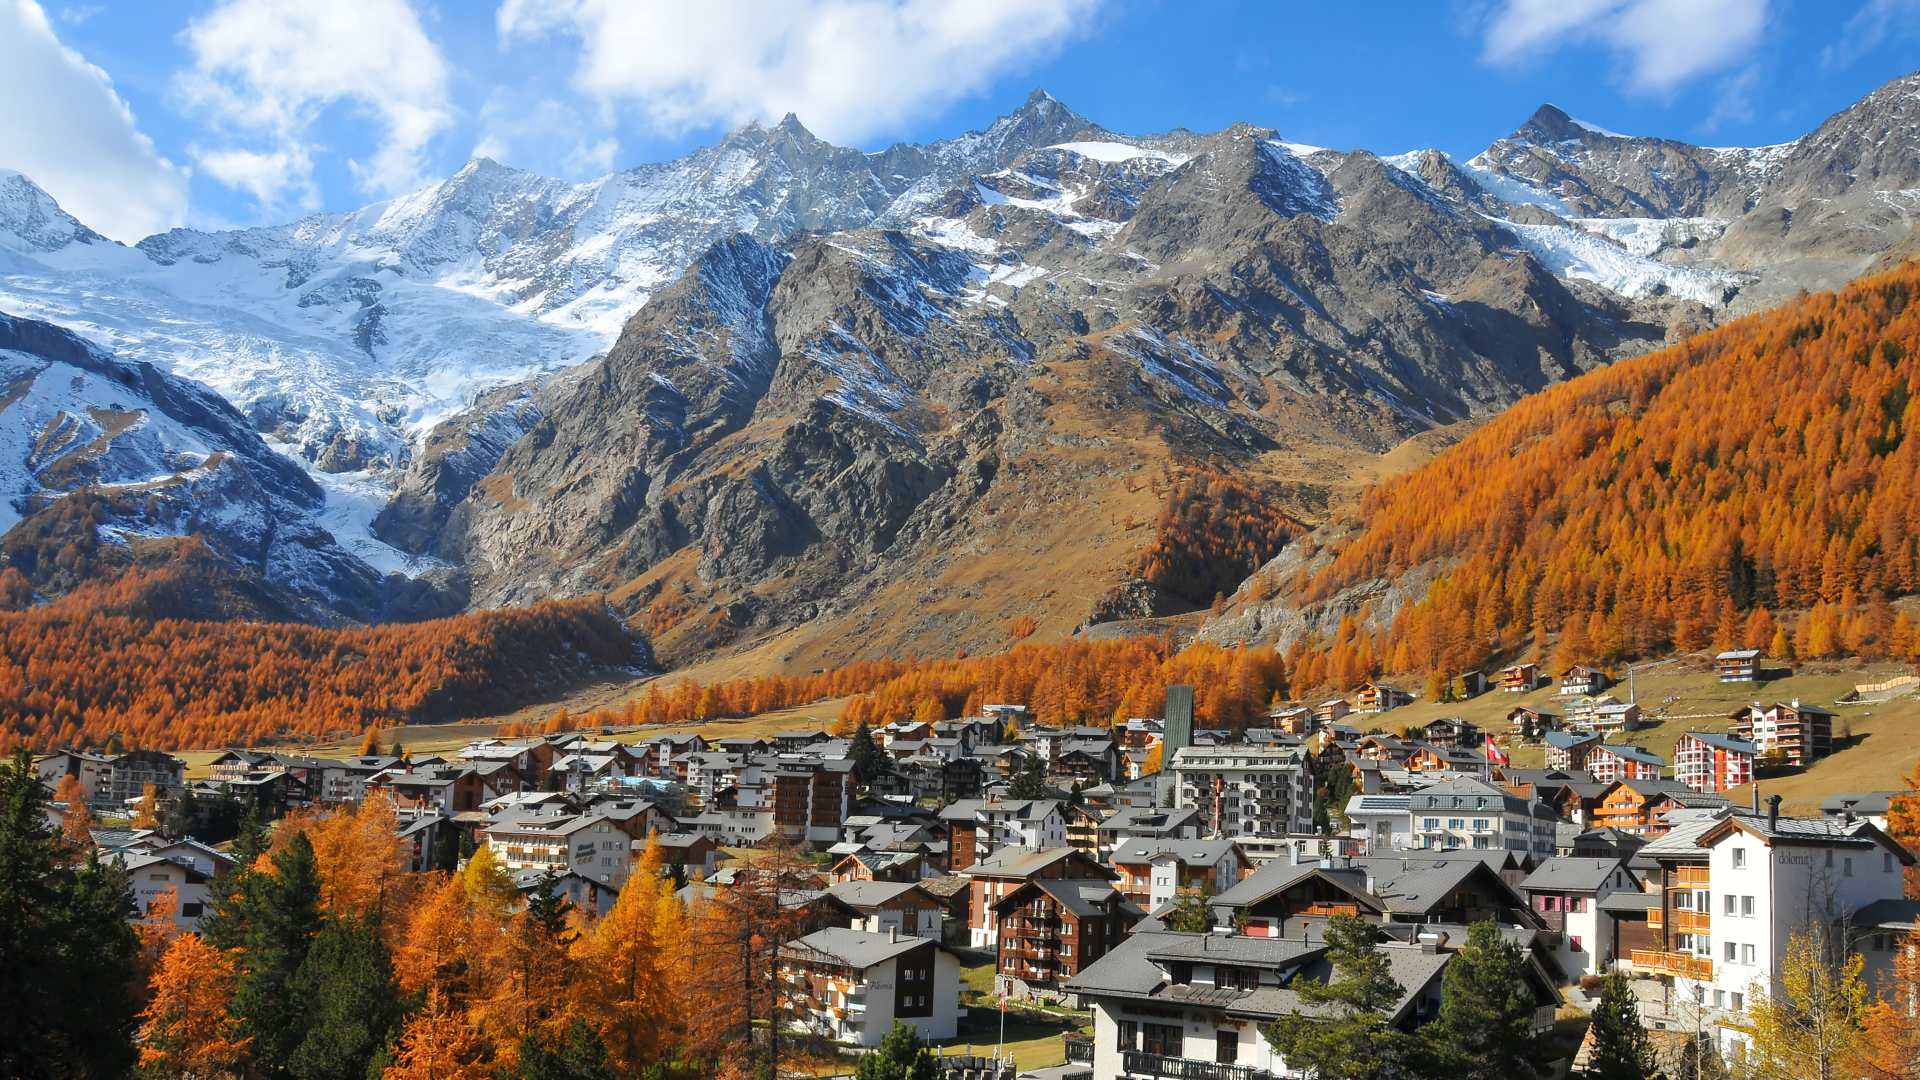 Dom mountain with the resort town of Saas-Fee in the foreground, Switzerland